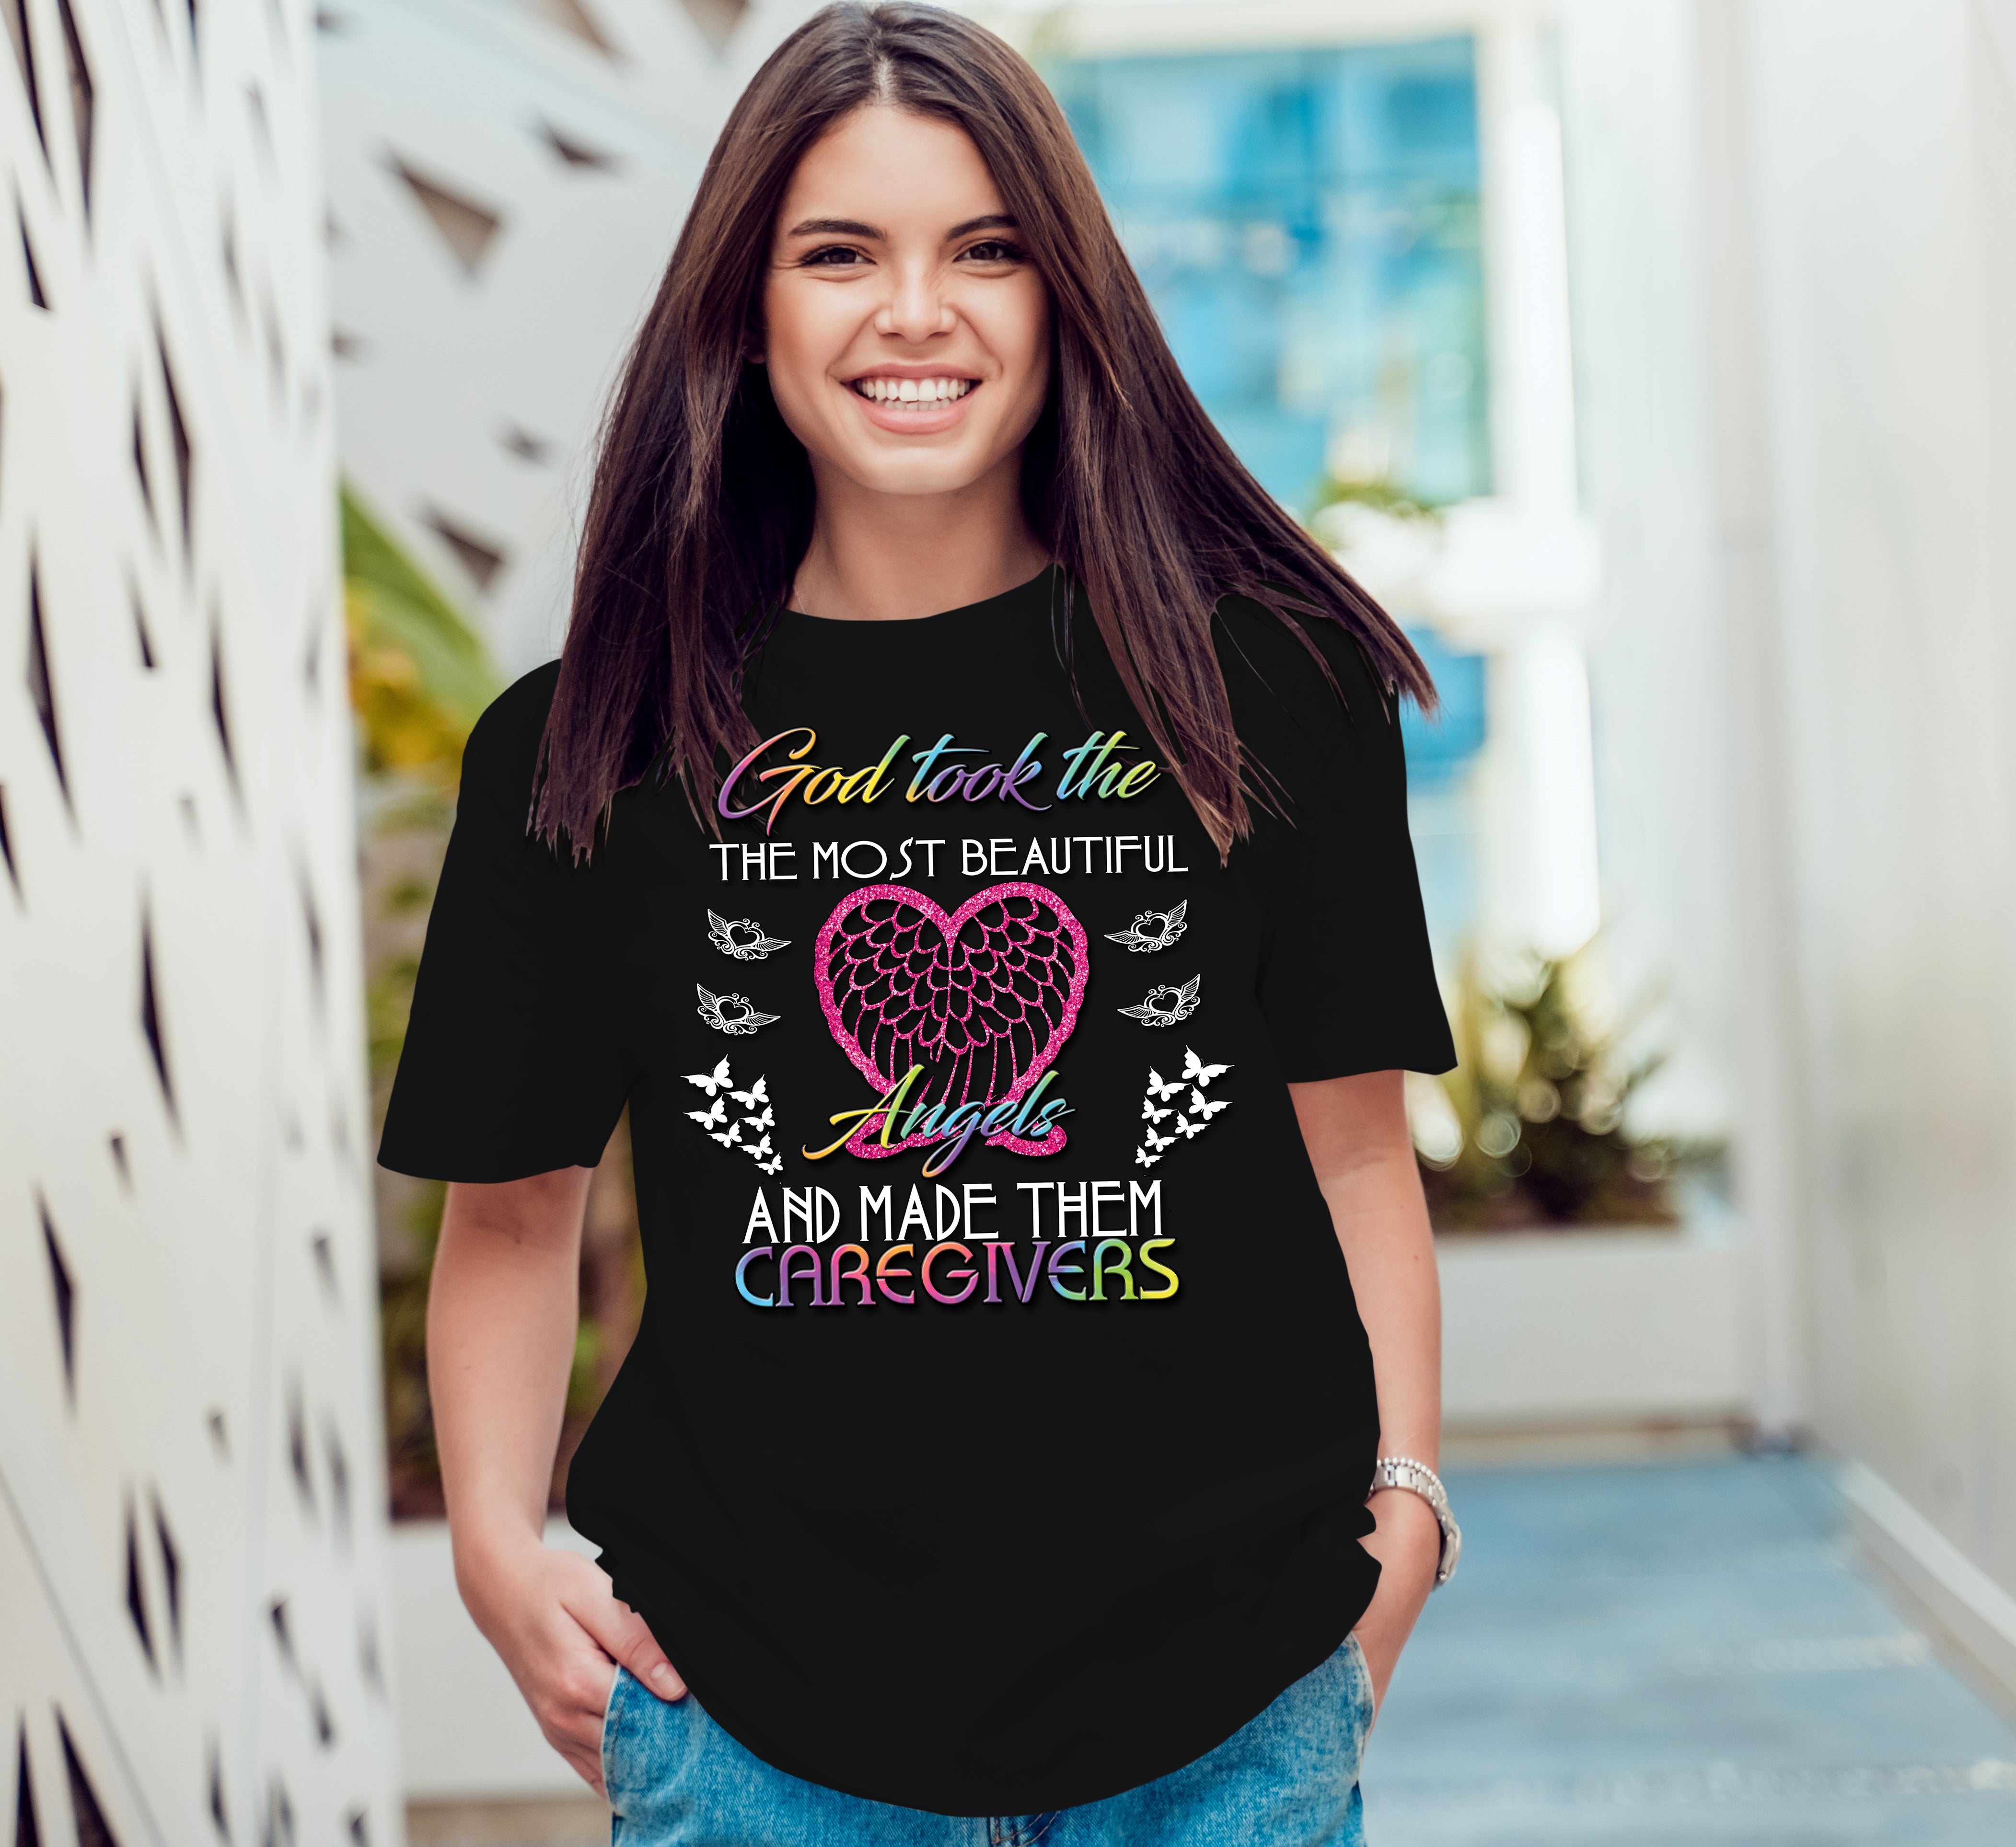 God Took The Most Beautiful Angels and Made Them Caregivers Glitter T-Shirt